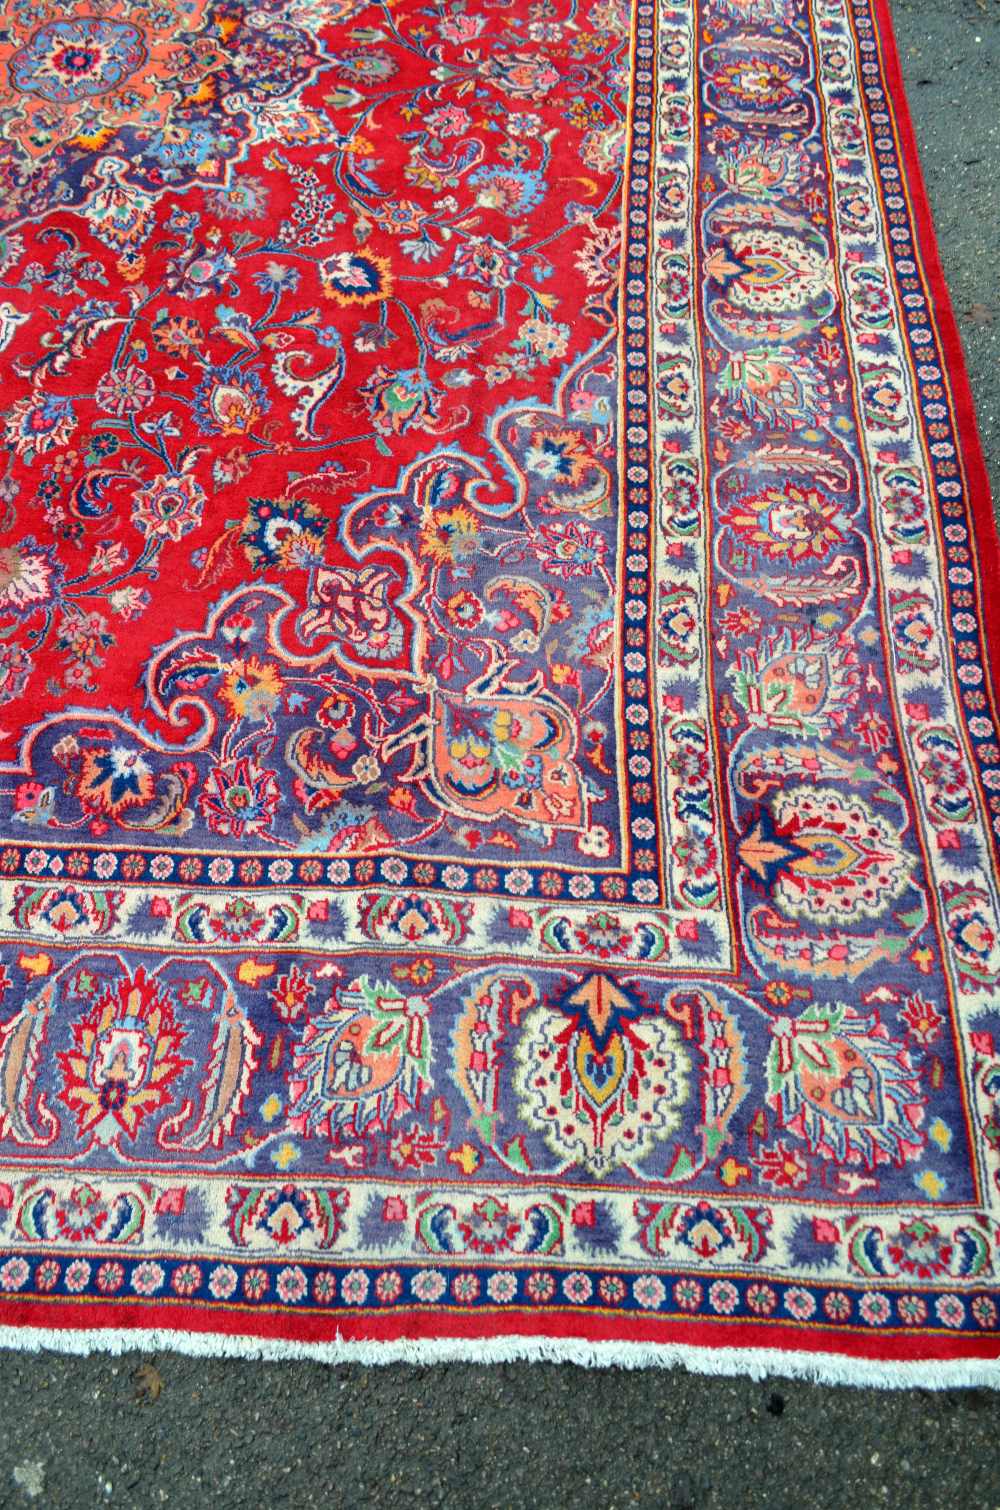 Hand woven persian Tabriz carpet, 100% wool, with multi-coloured design - Image 5 of 7